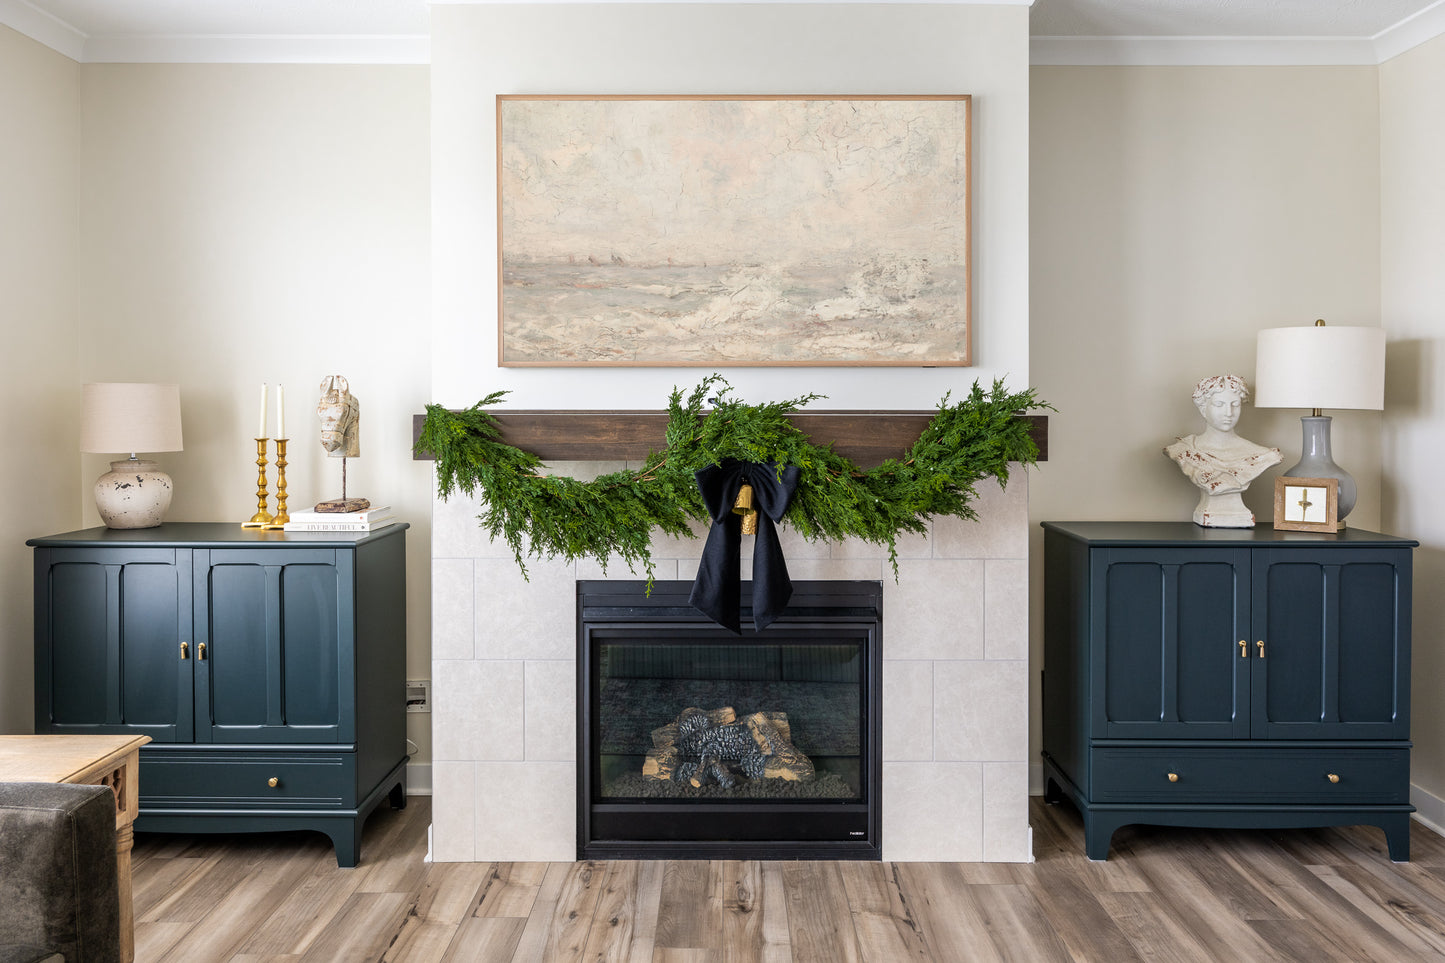 Winter berry holiday garland draped across mantle layered with faux cedar garland featuring white blue juniper berries.